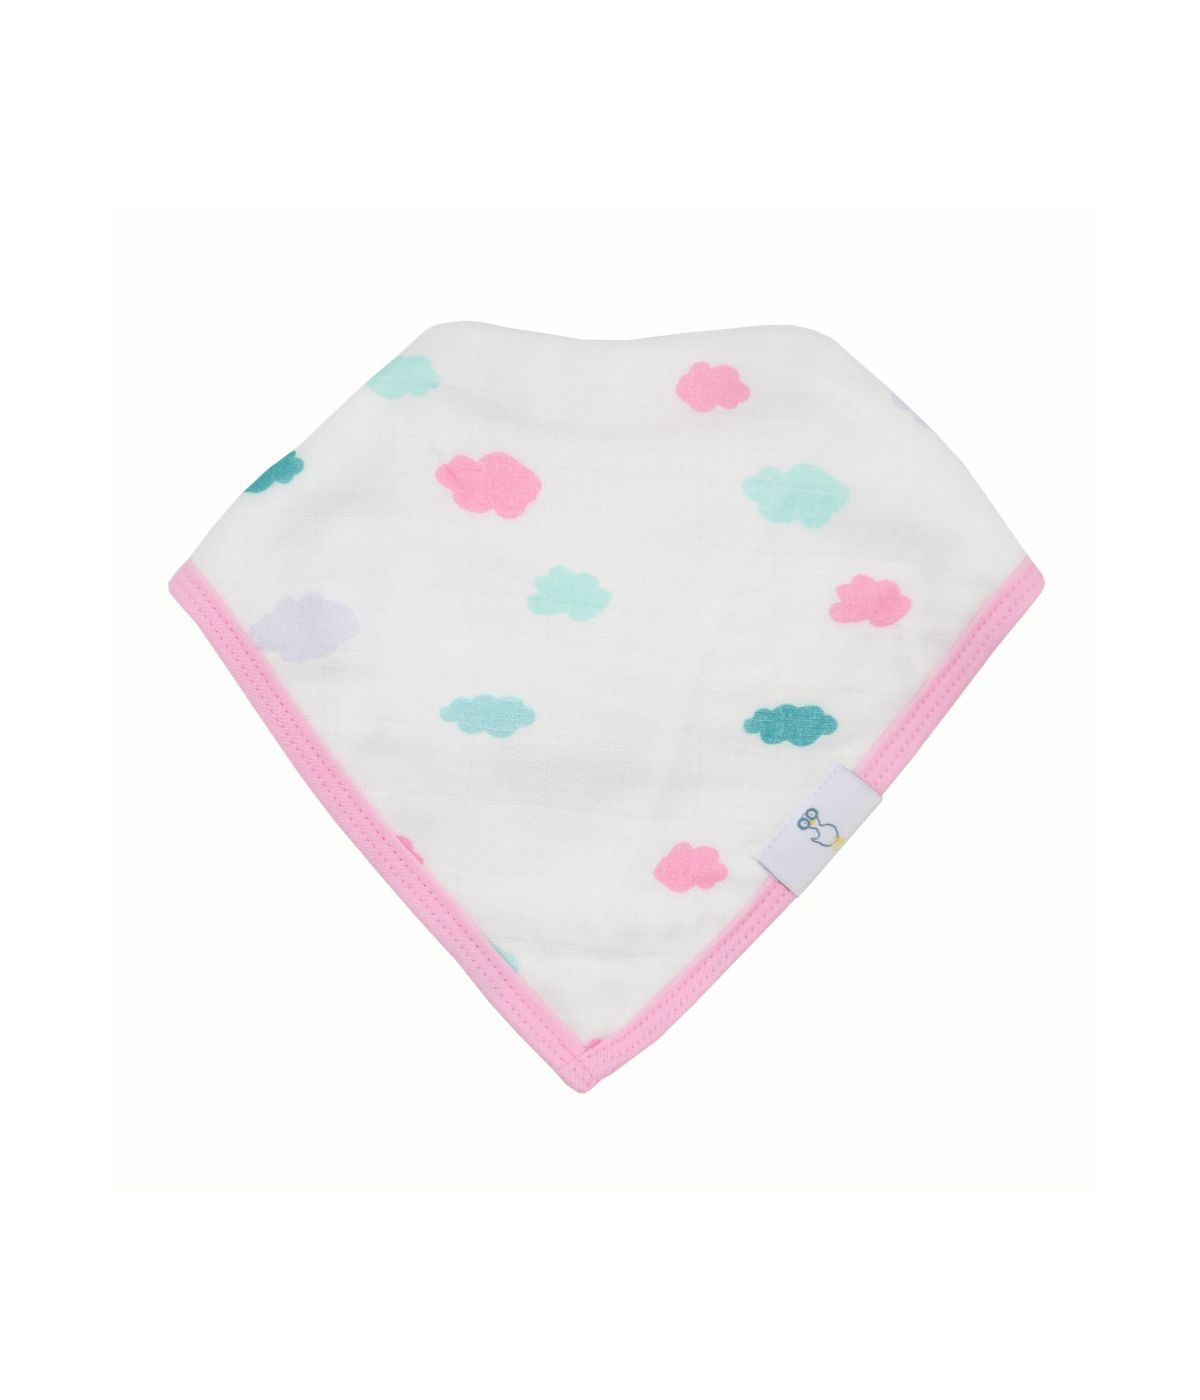 Clouds and Castles 2 Pack Muslin & Terry Cloth Bib Set White/Pink/Teal